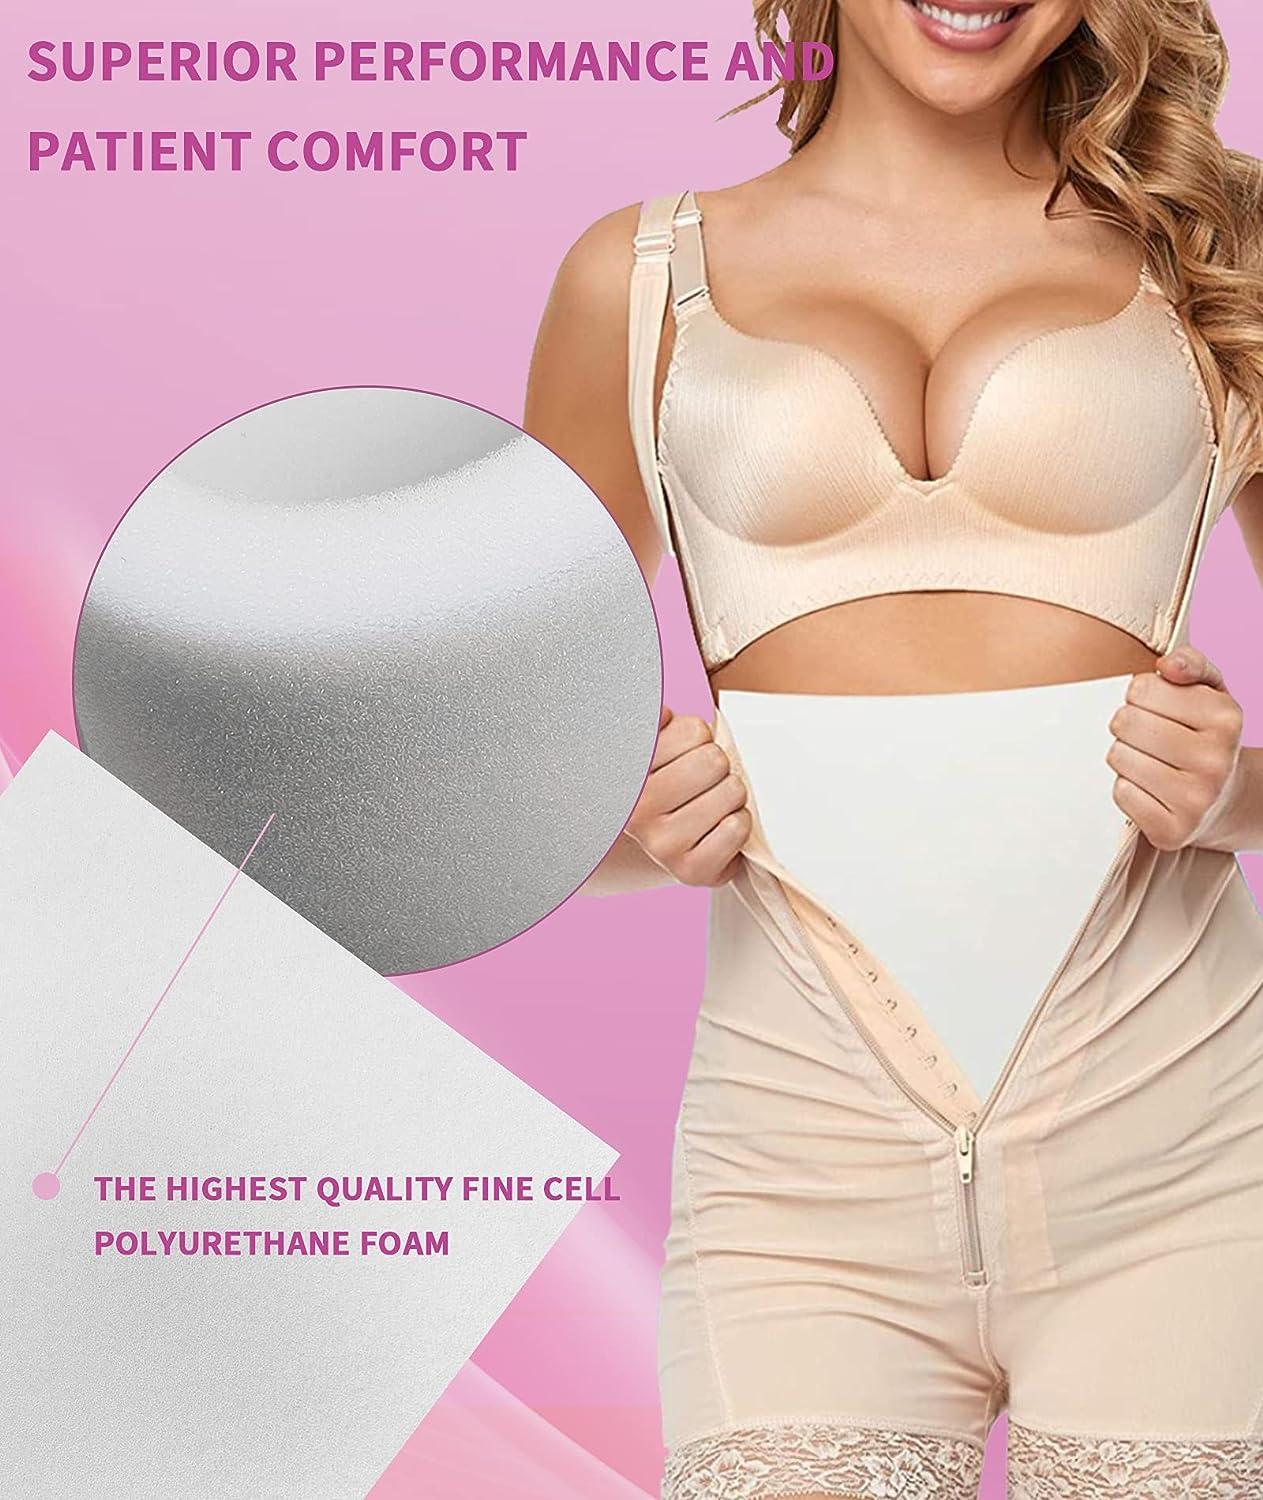 Birllaid Lipo Foam Pads for Post Surgery, Bbl Foam Boards after Lipo,Help  Out When Using Ab Board Compression Garments Tummy Tuck, 4 Pack Liposuction  Surgery Foam Sheet for Recovery 8X11